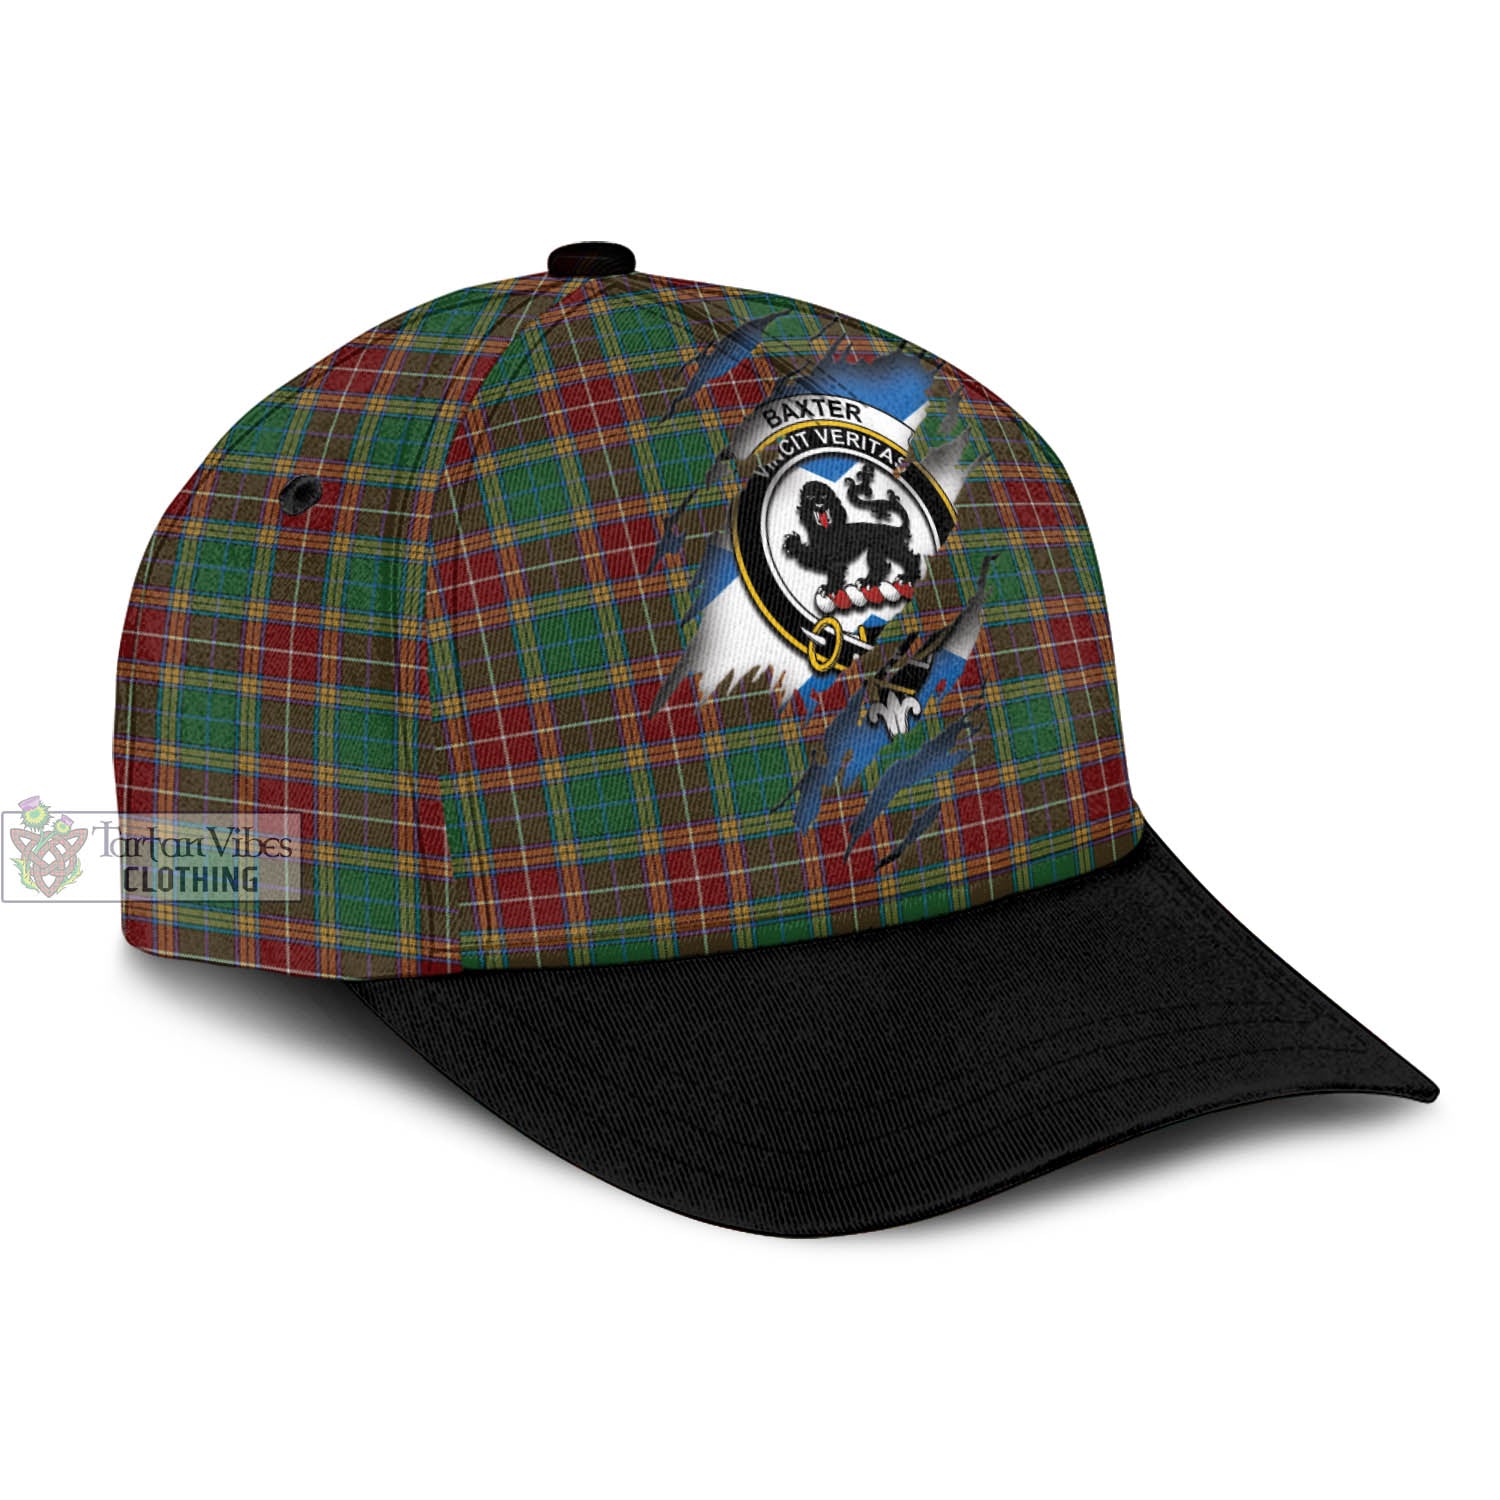 Tartan Vibes Clothing Baxter Tartan Classic Cap with Family Crest In Me Style